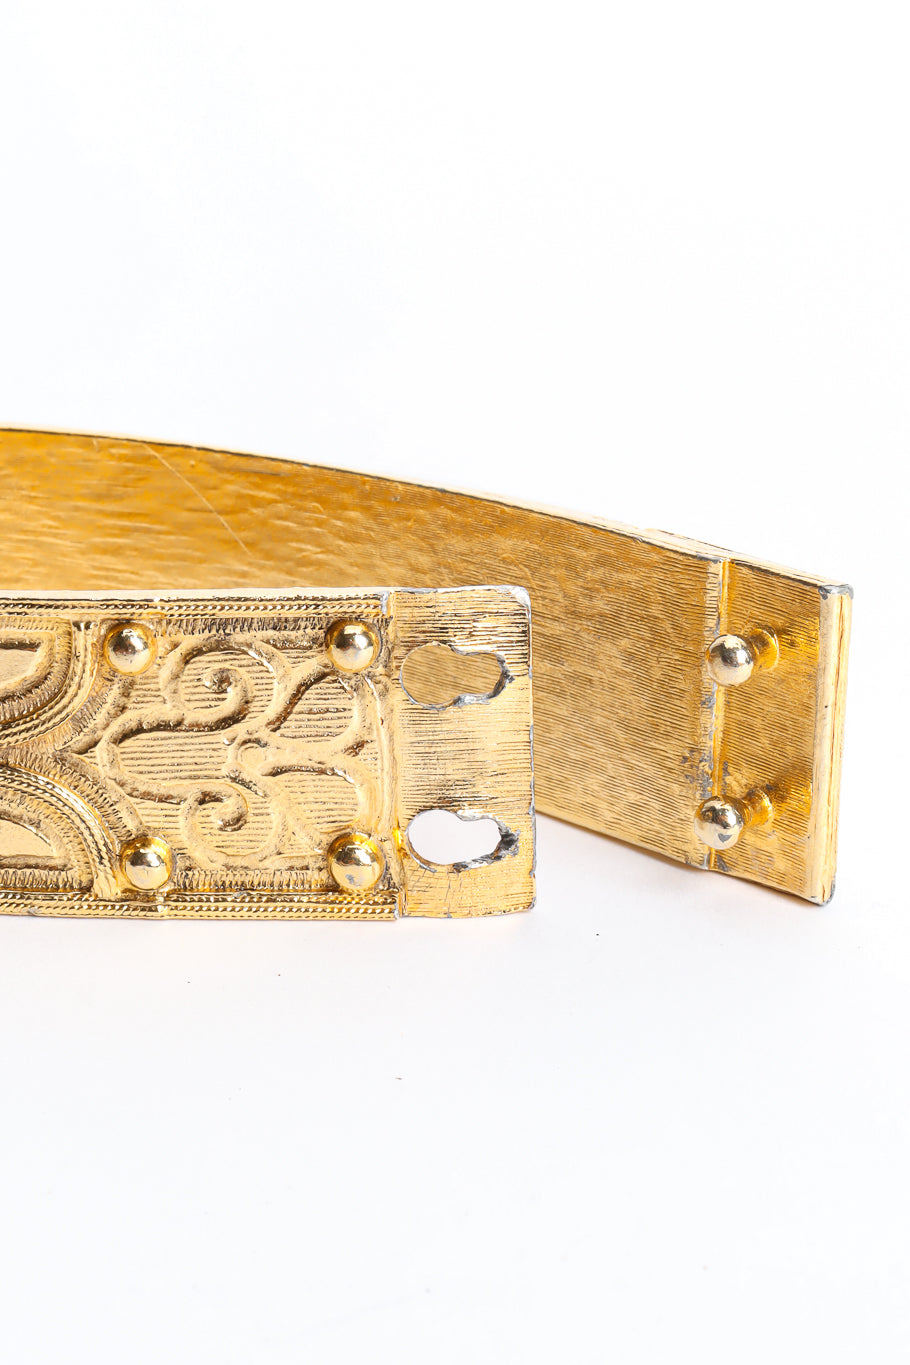 Gold metal band belt by Accessocraft pin hole clasps @recessla